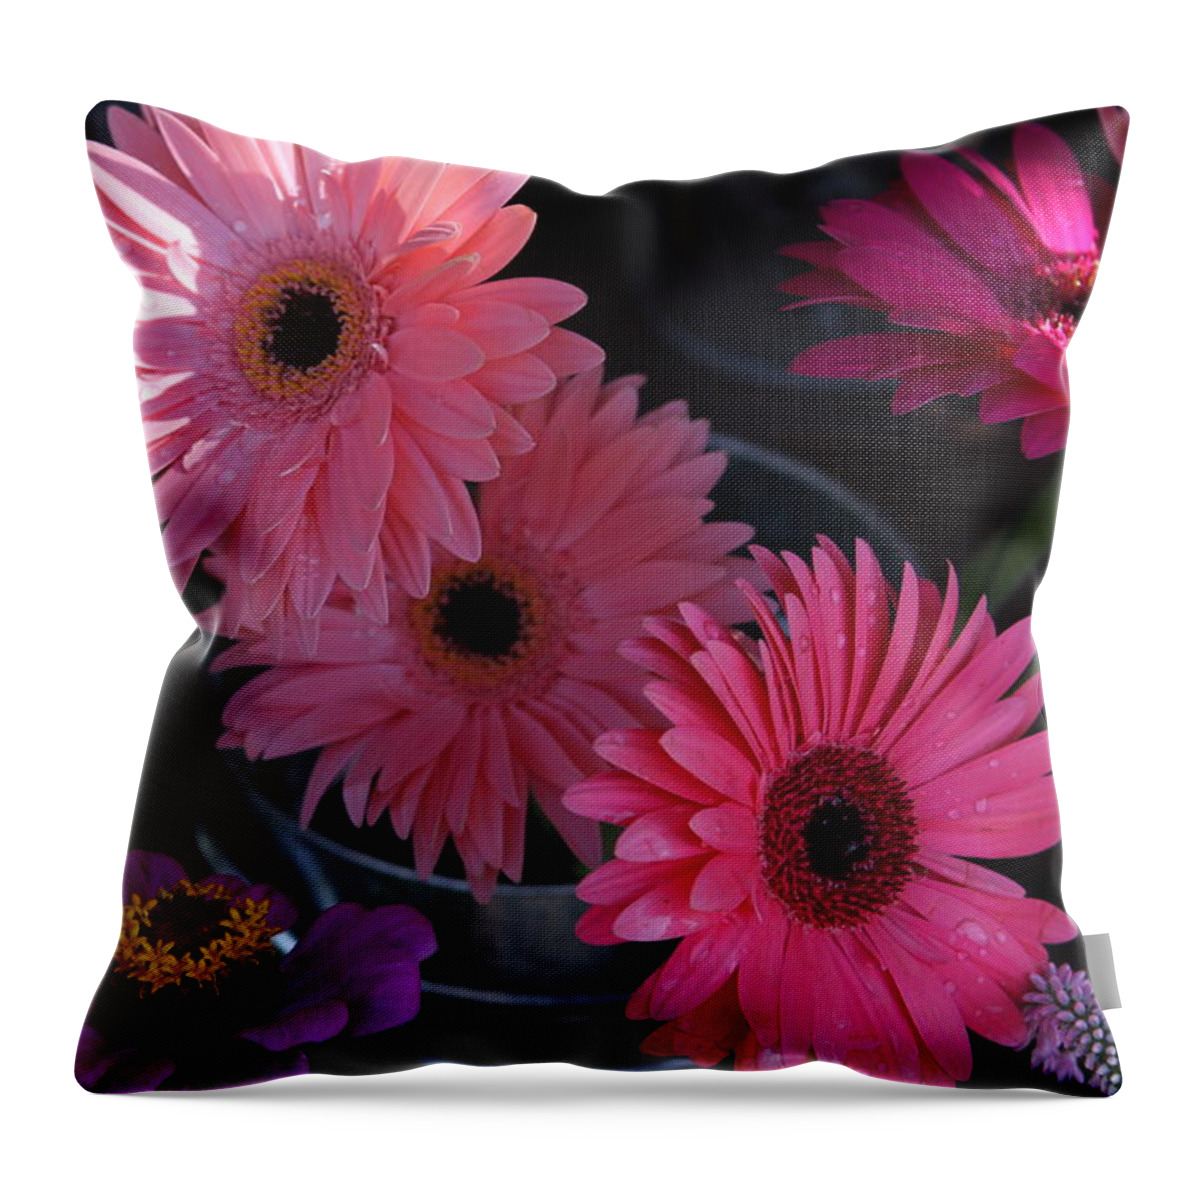 Pink Flowers Throw Pillow featuring the photograph Pretty In Pink by Karen Ruhl